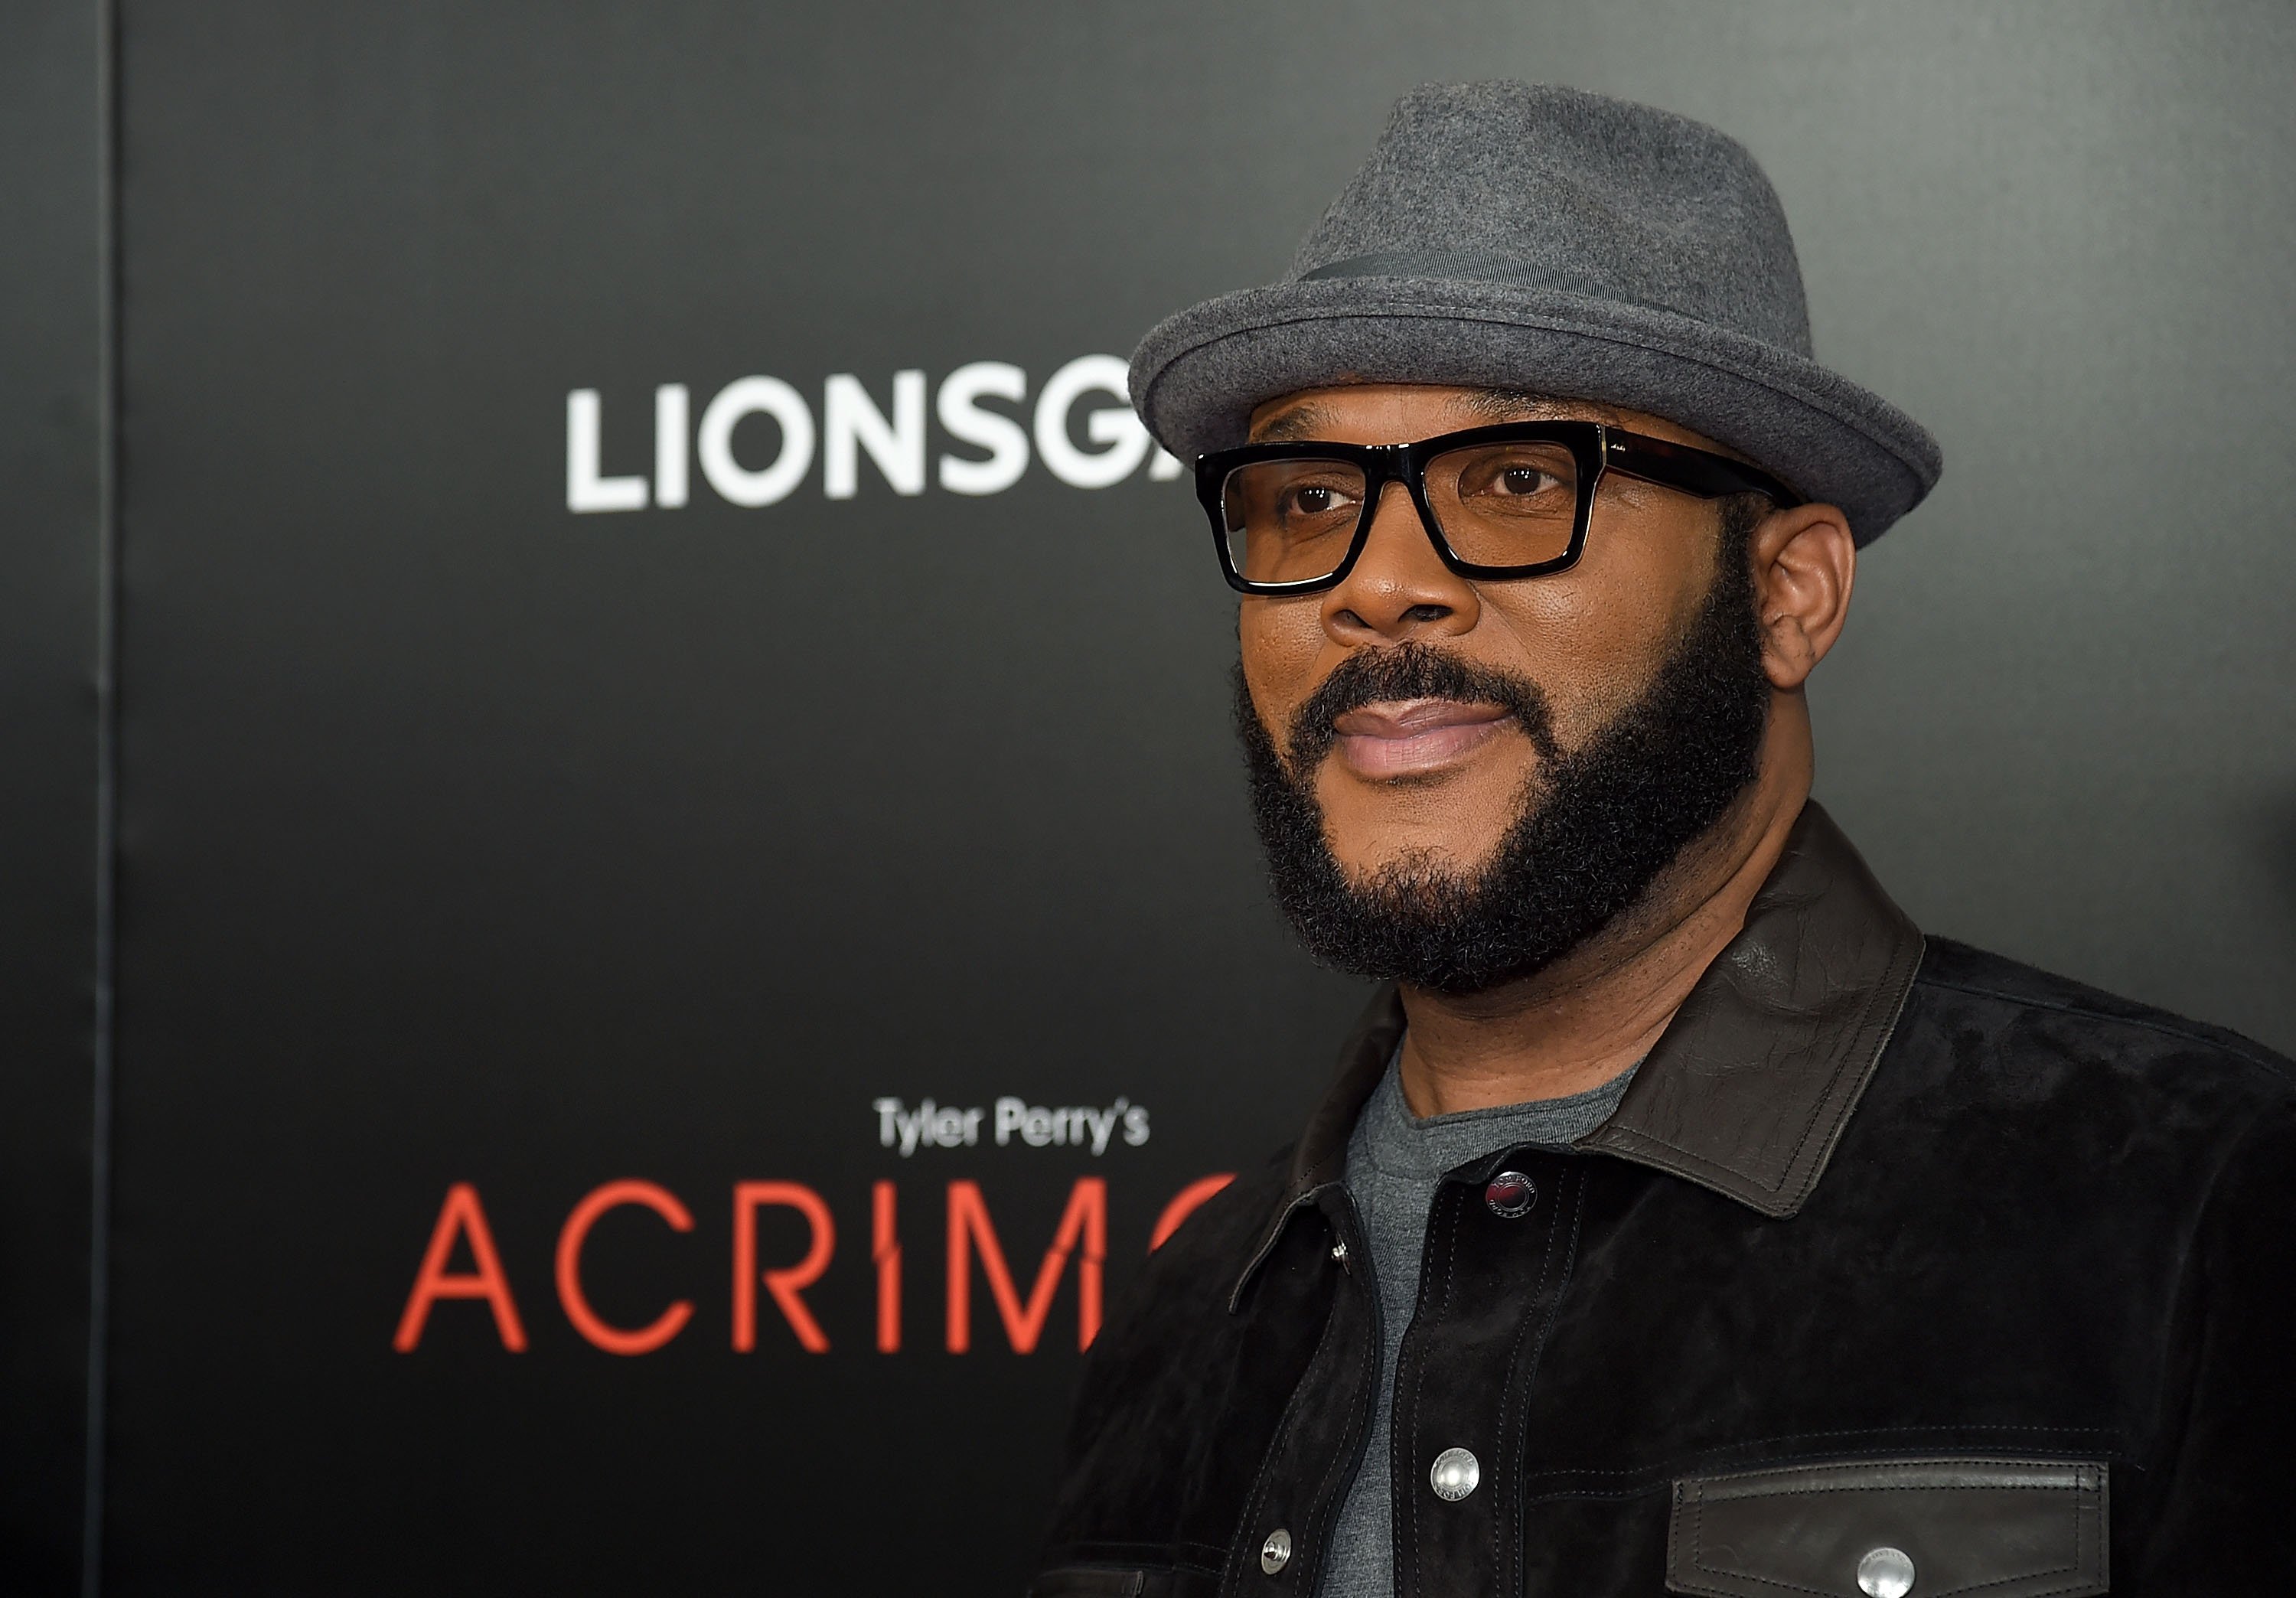 Tyler Perry attends the "Acrimony" New York Premiere on March 27, 2018 in New York City. | Photo: Getty Images